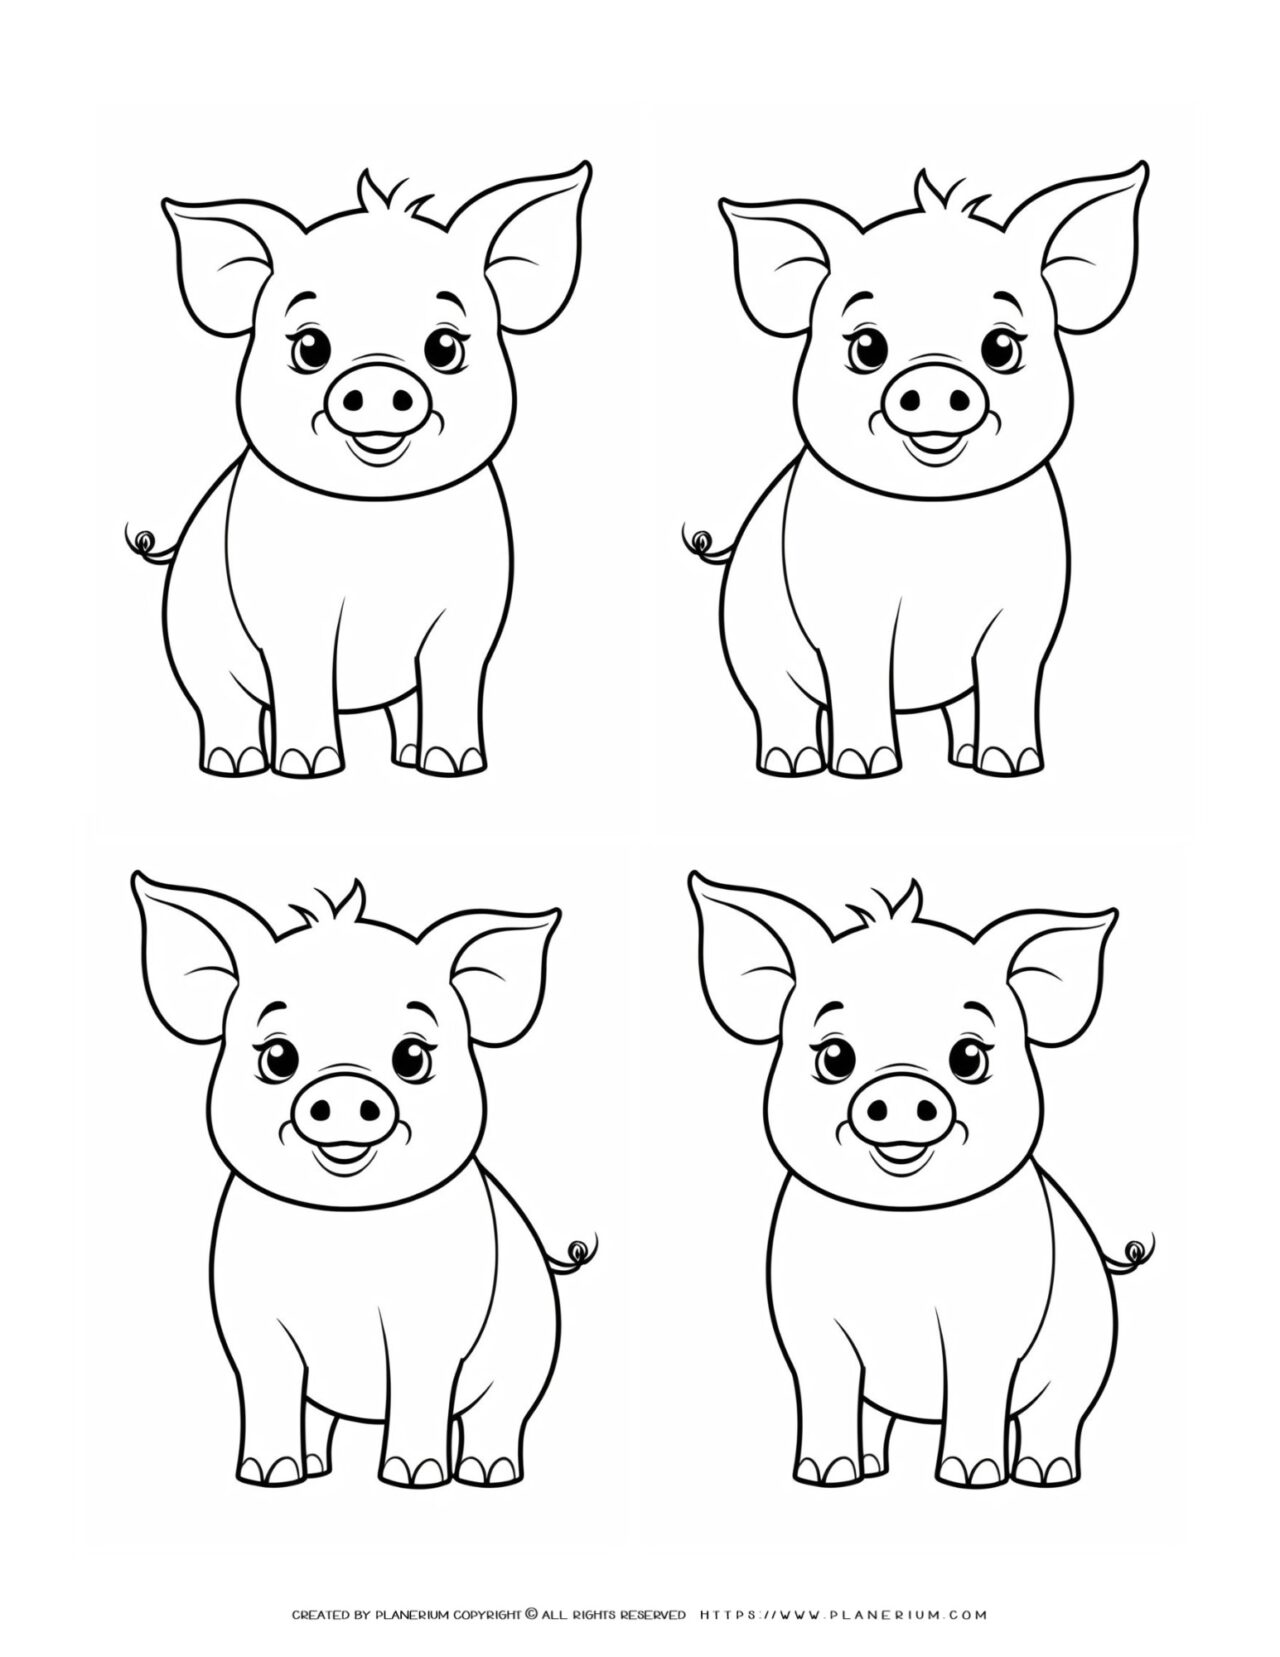 four-cute-baby-pig-outlines-farm-template